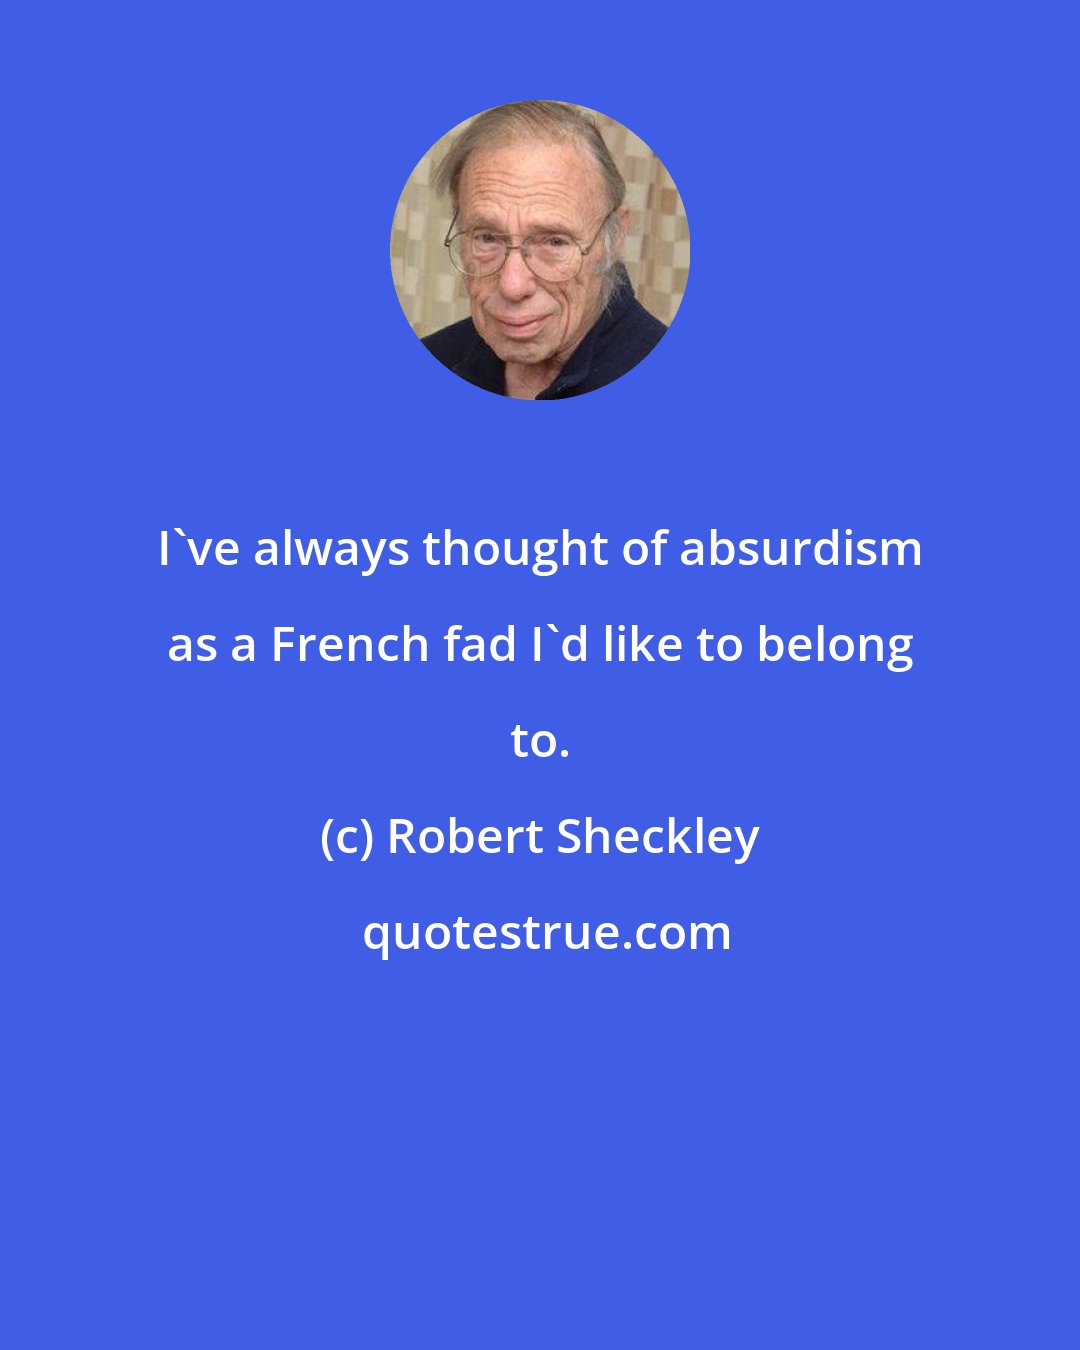 Robert Sheckley: I've always thought of absurdism as a French fad I'd like to belong to.